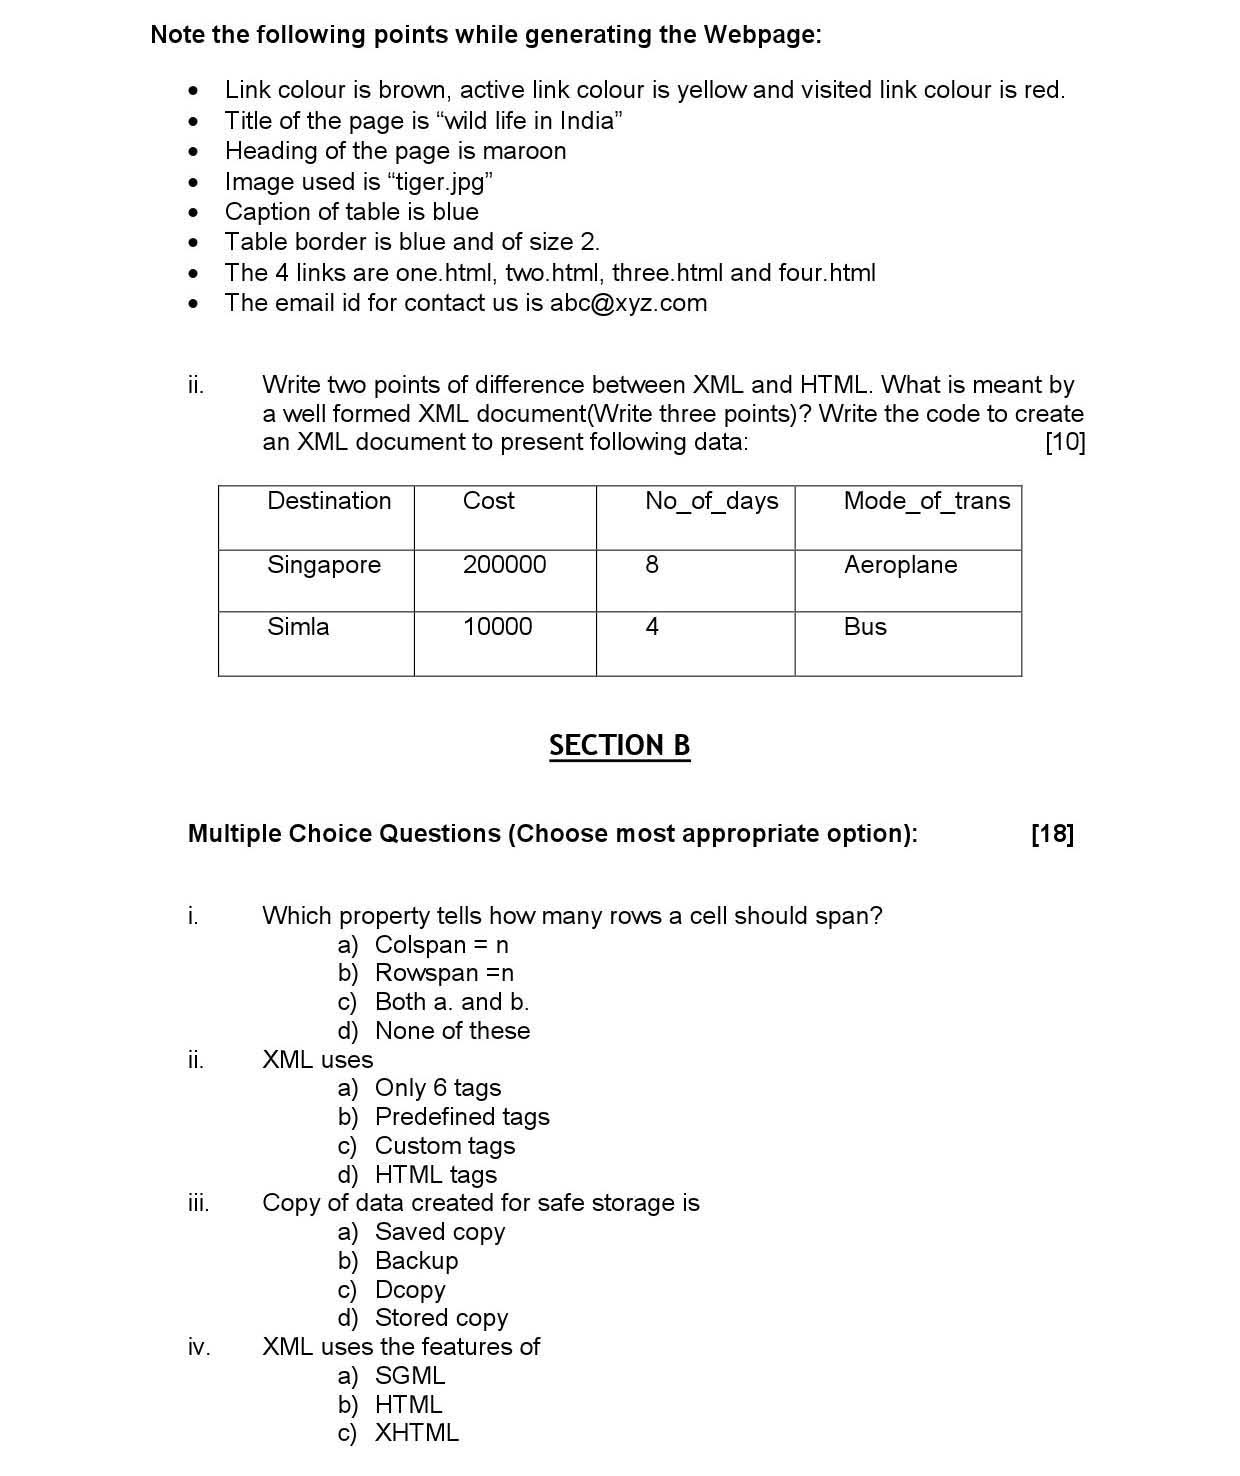 Foundation of Information Technology CBSE Class X Sample Question Paper 2015 16 - Image 4